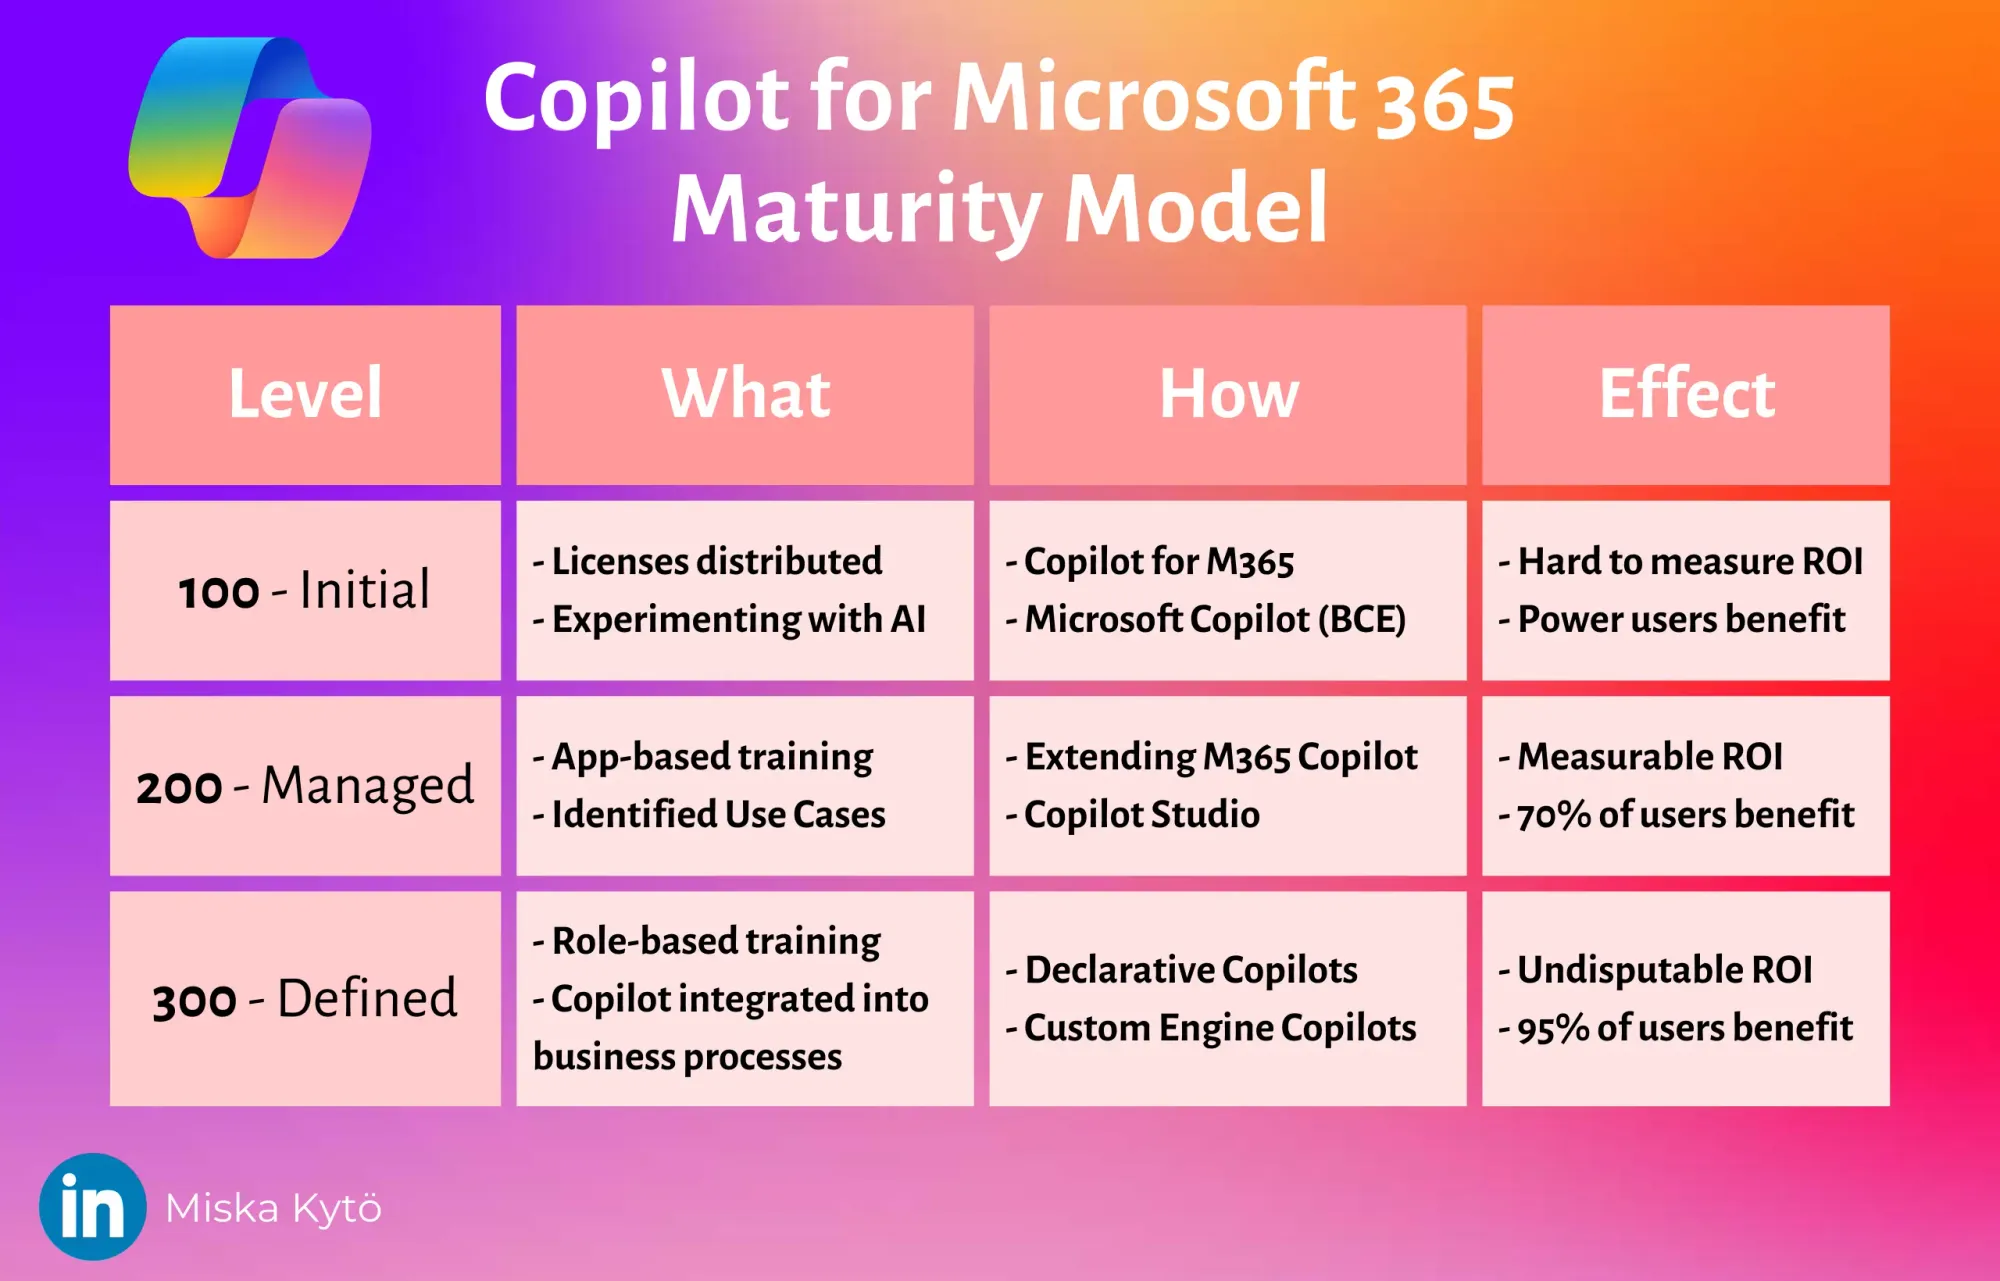 Copilot for Microsoft 365 Maturity Model - How to level up your organization with AI ✨